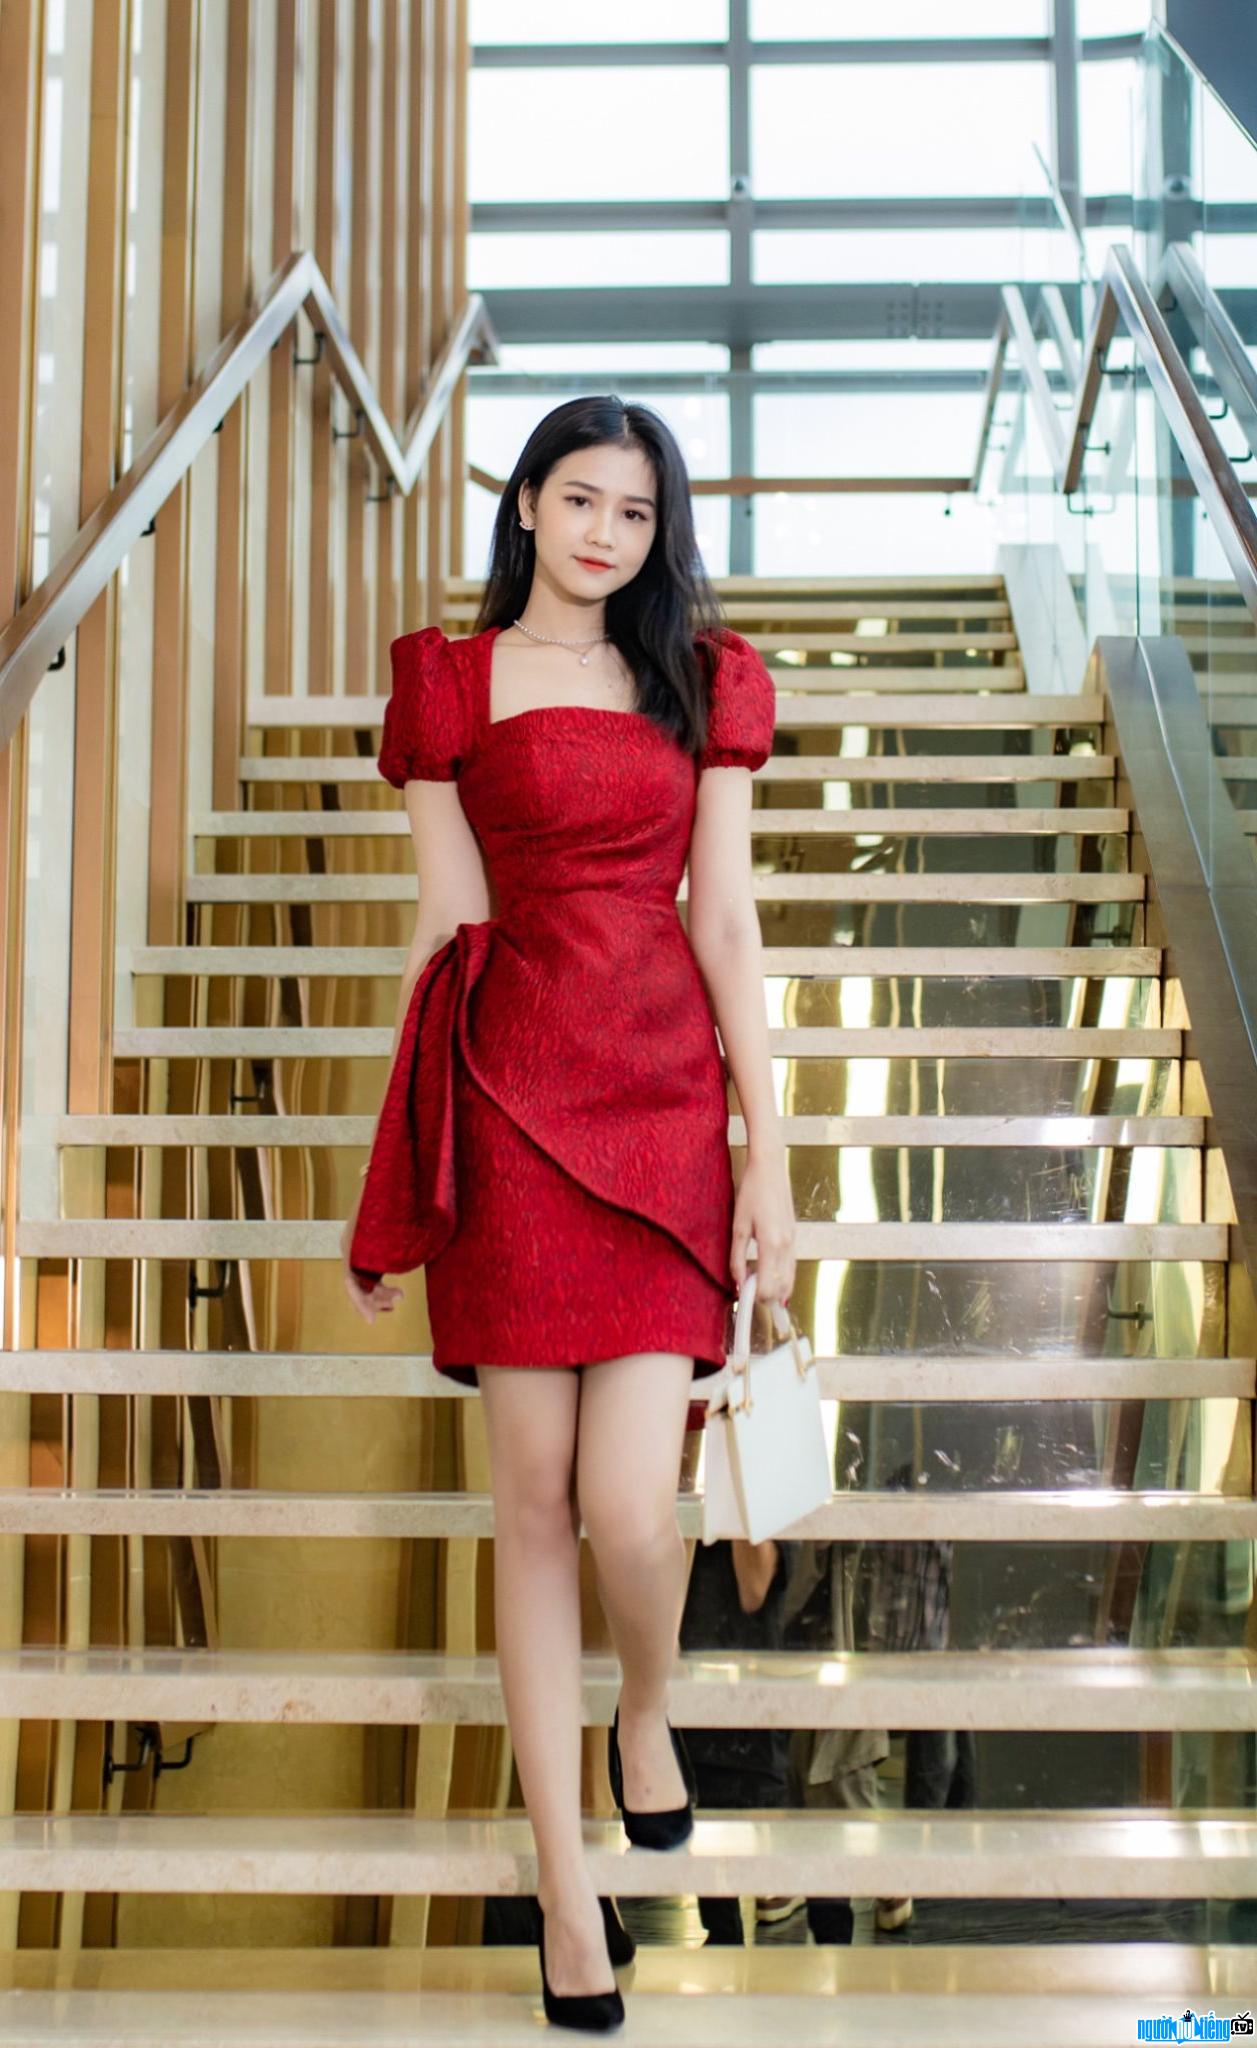  Charming Kim Yen image in a red dress